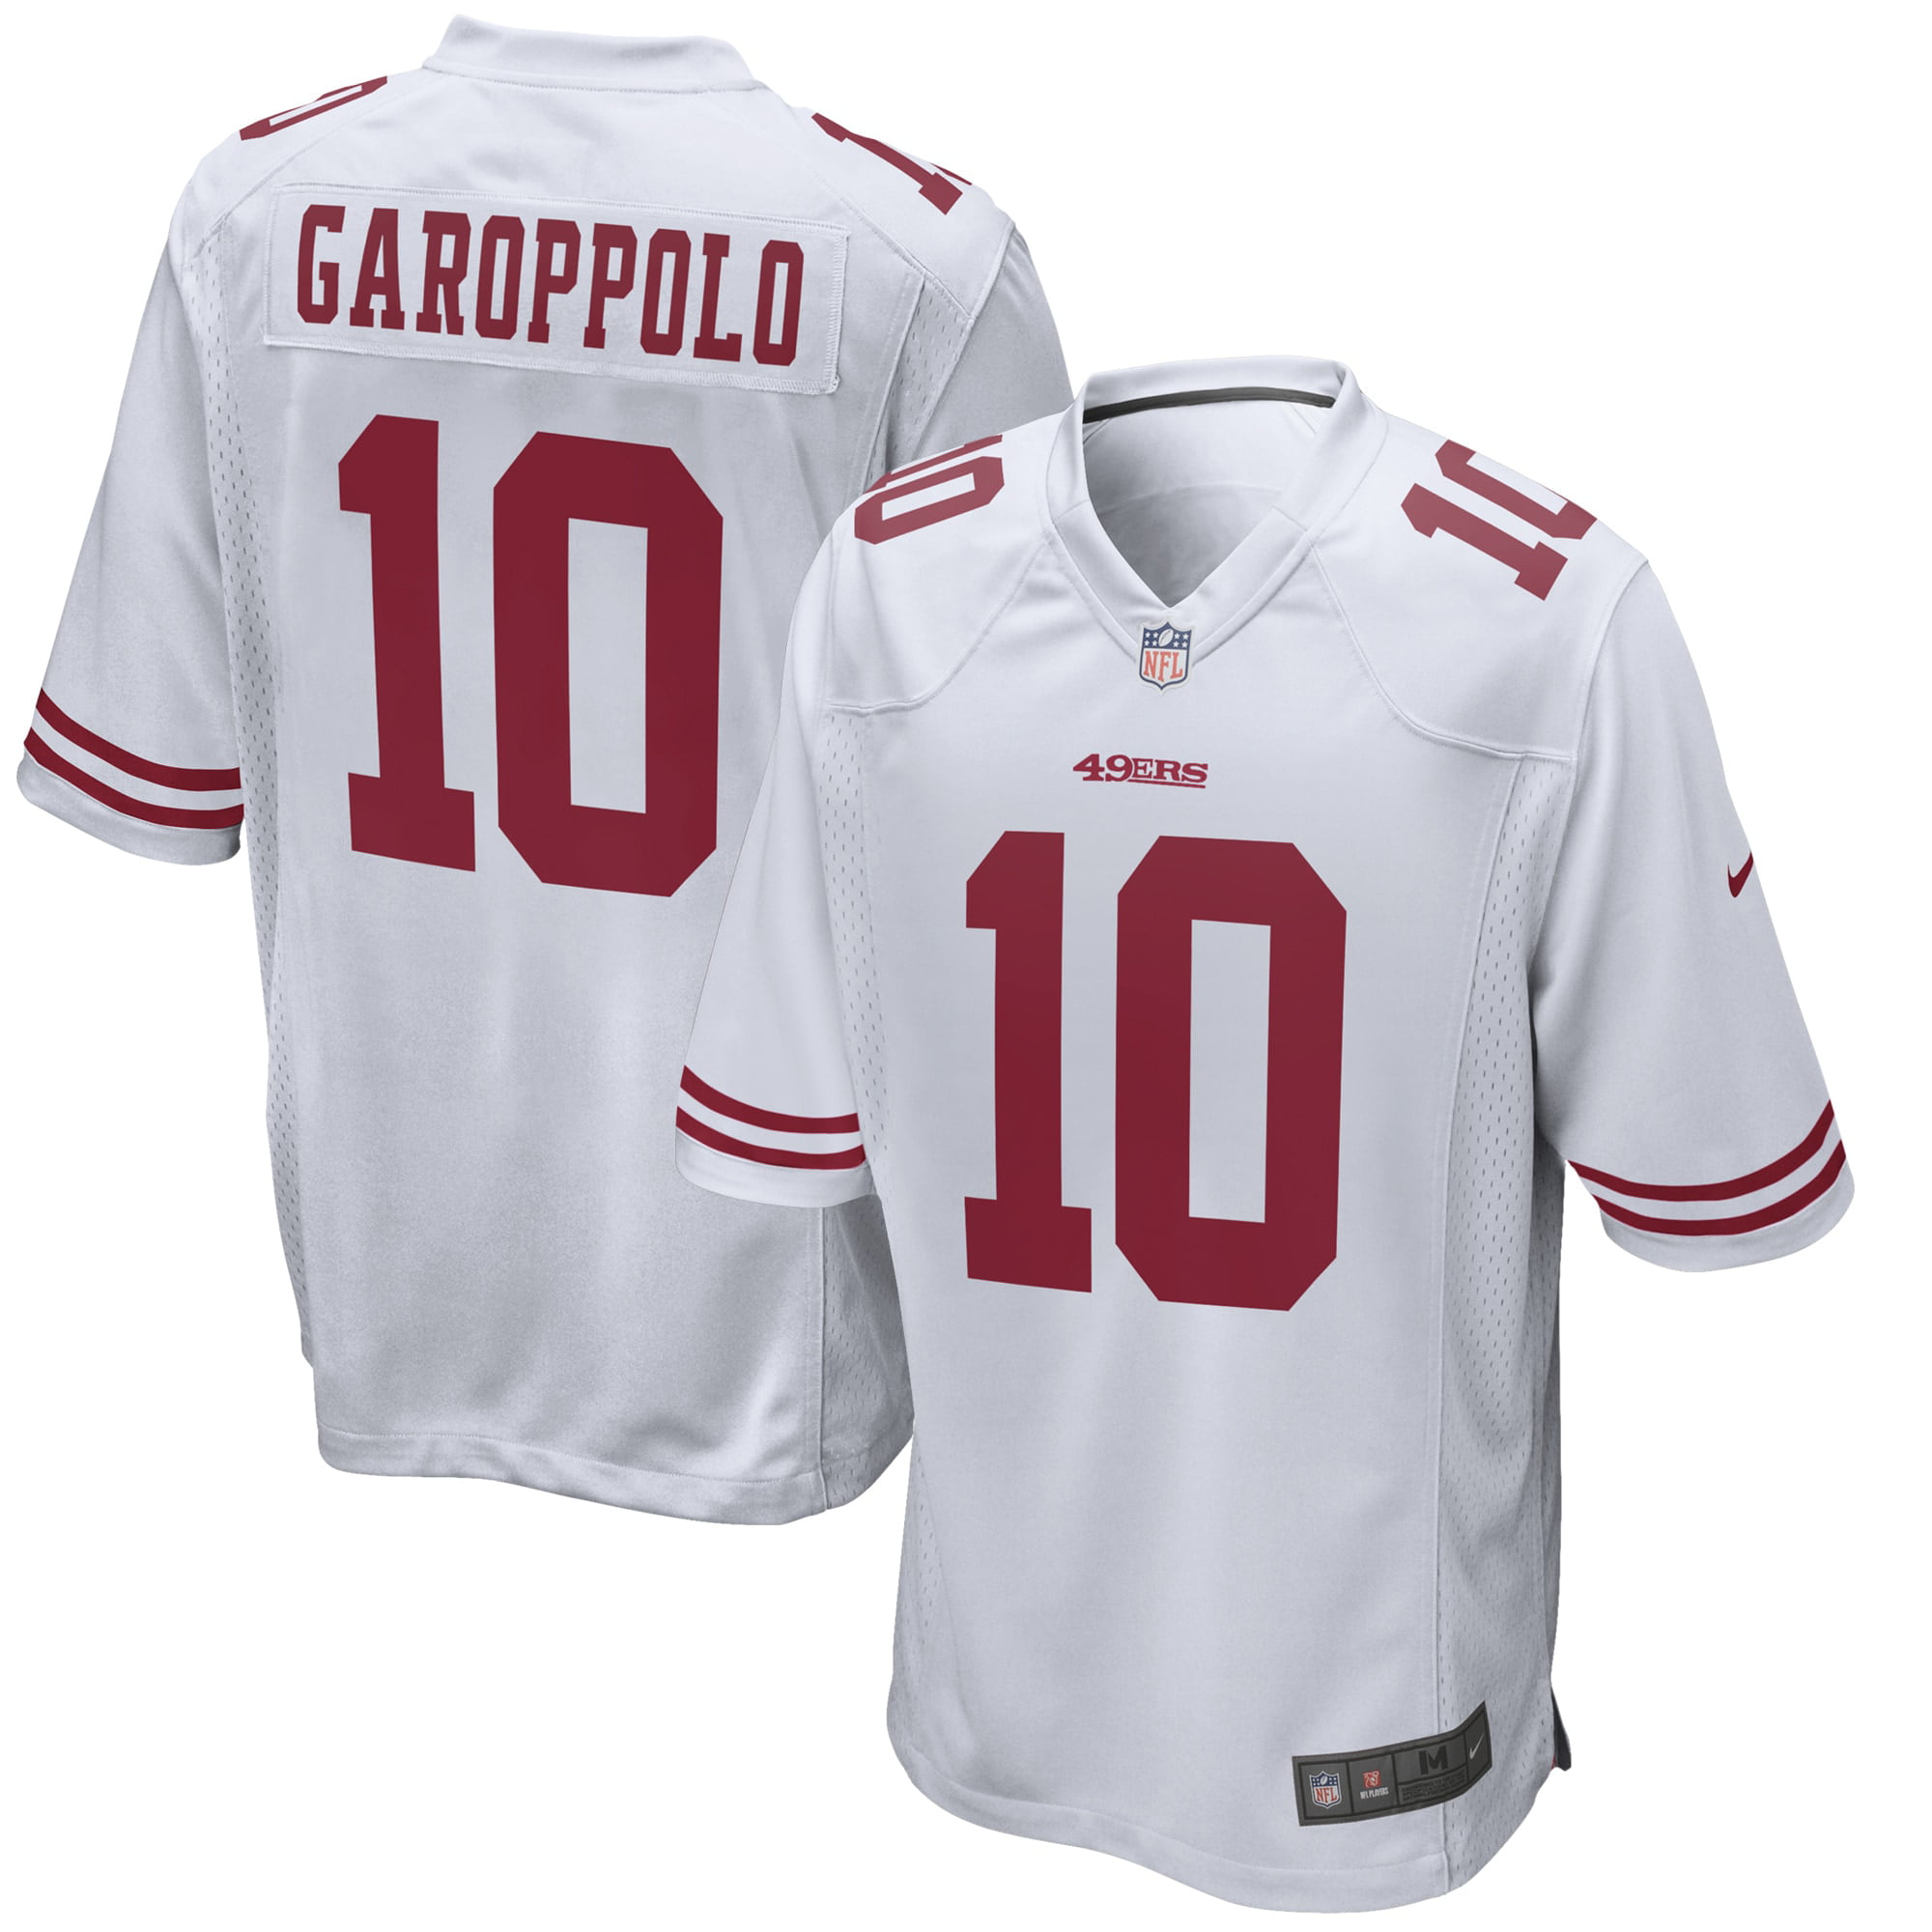 49ers game jersey